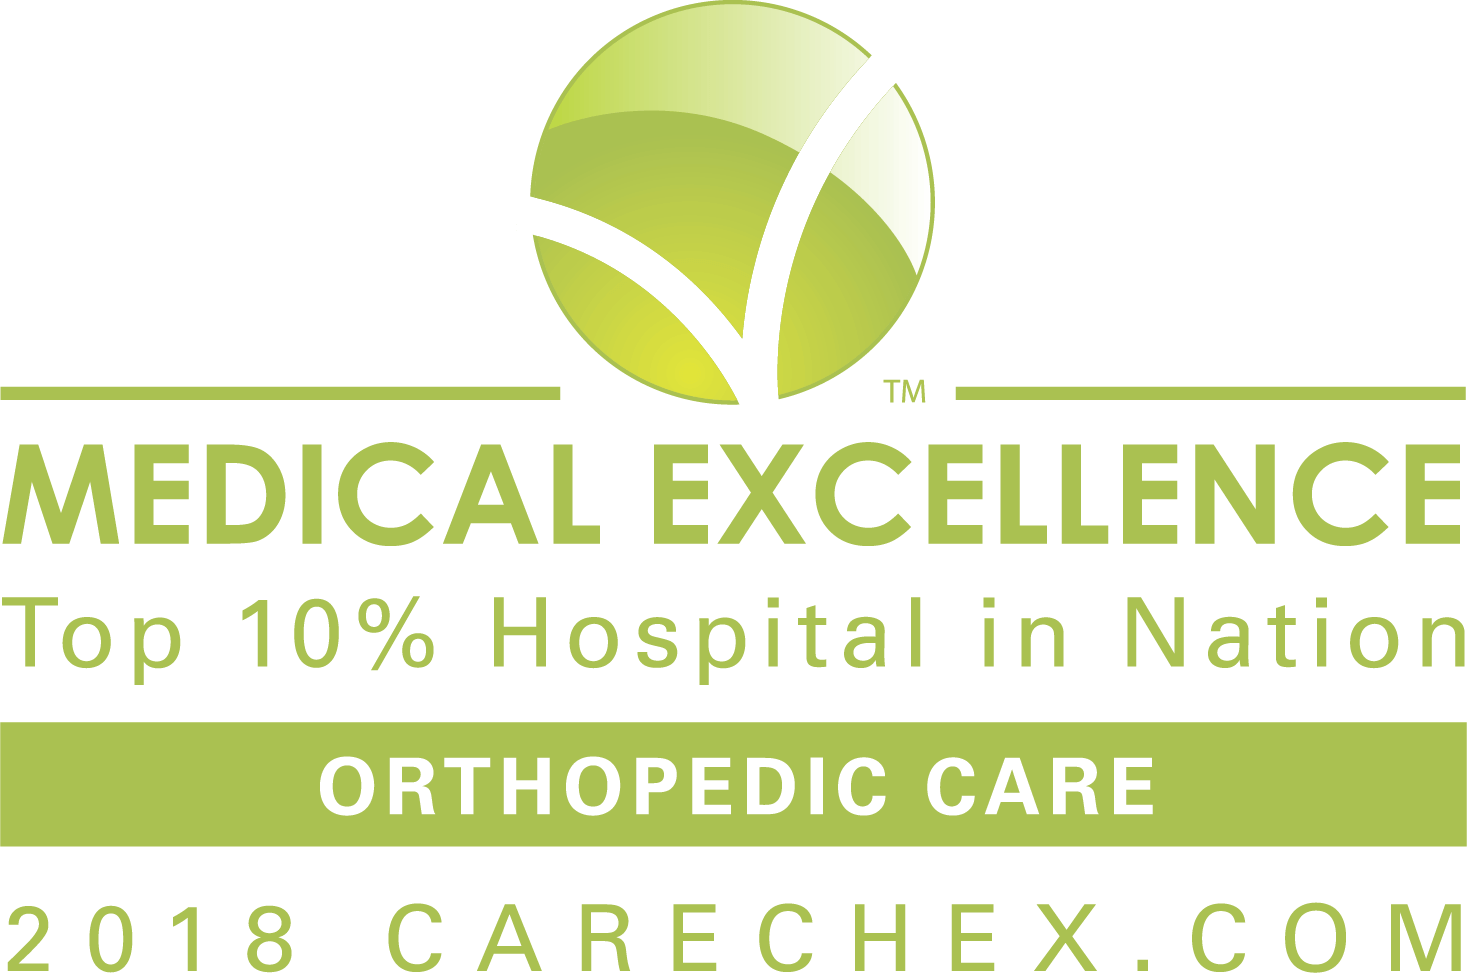 Williamson Medical Center 2018 CareChex Award- Top 10% Hospital in Nation for Medical Excellence Orthopedic Care.